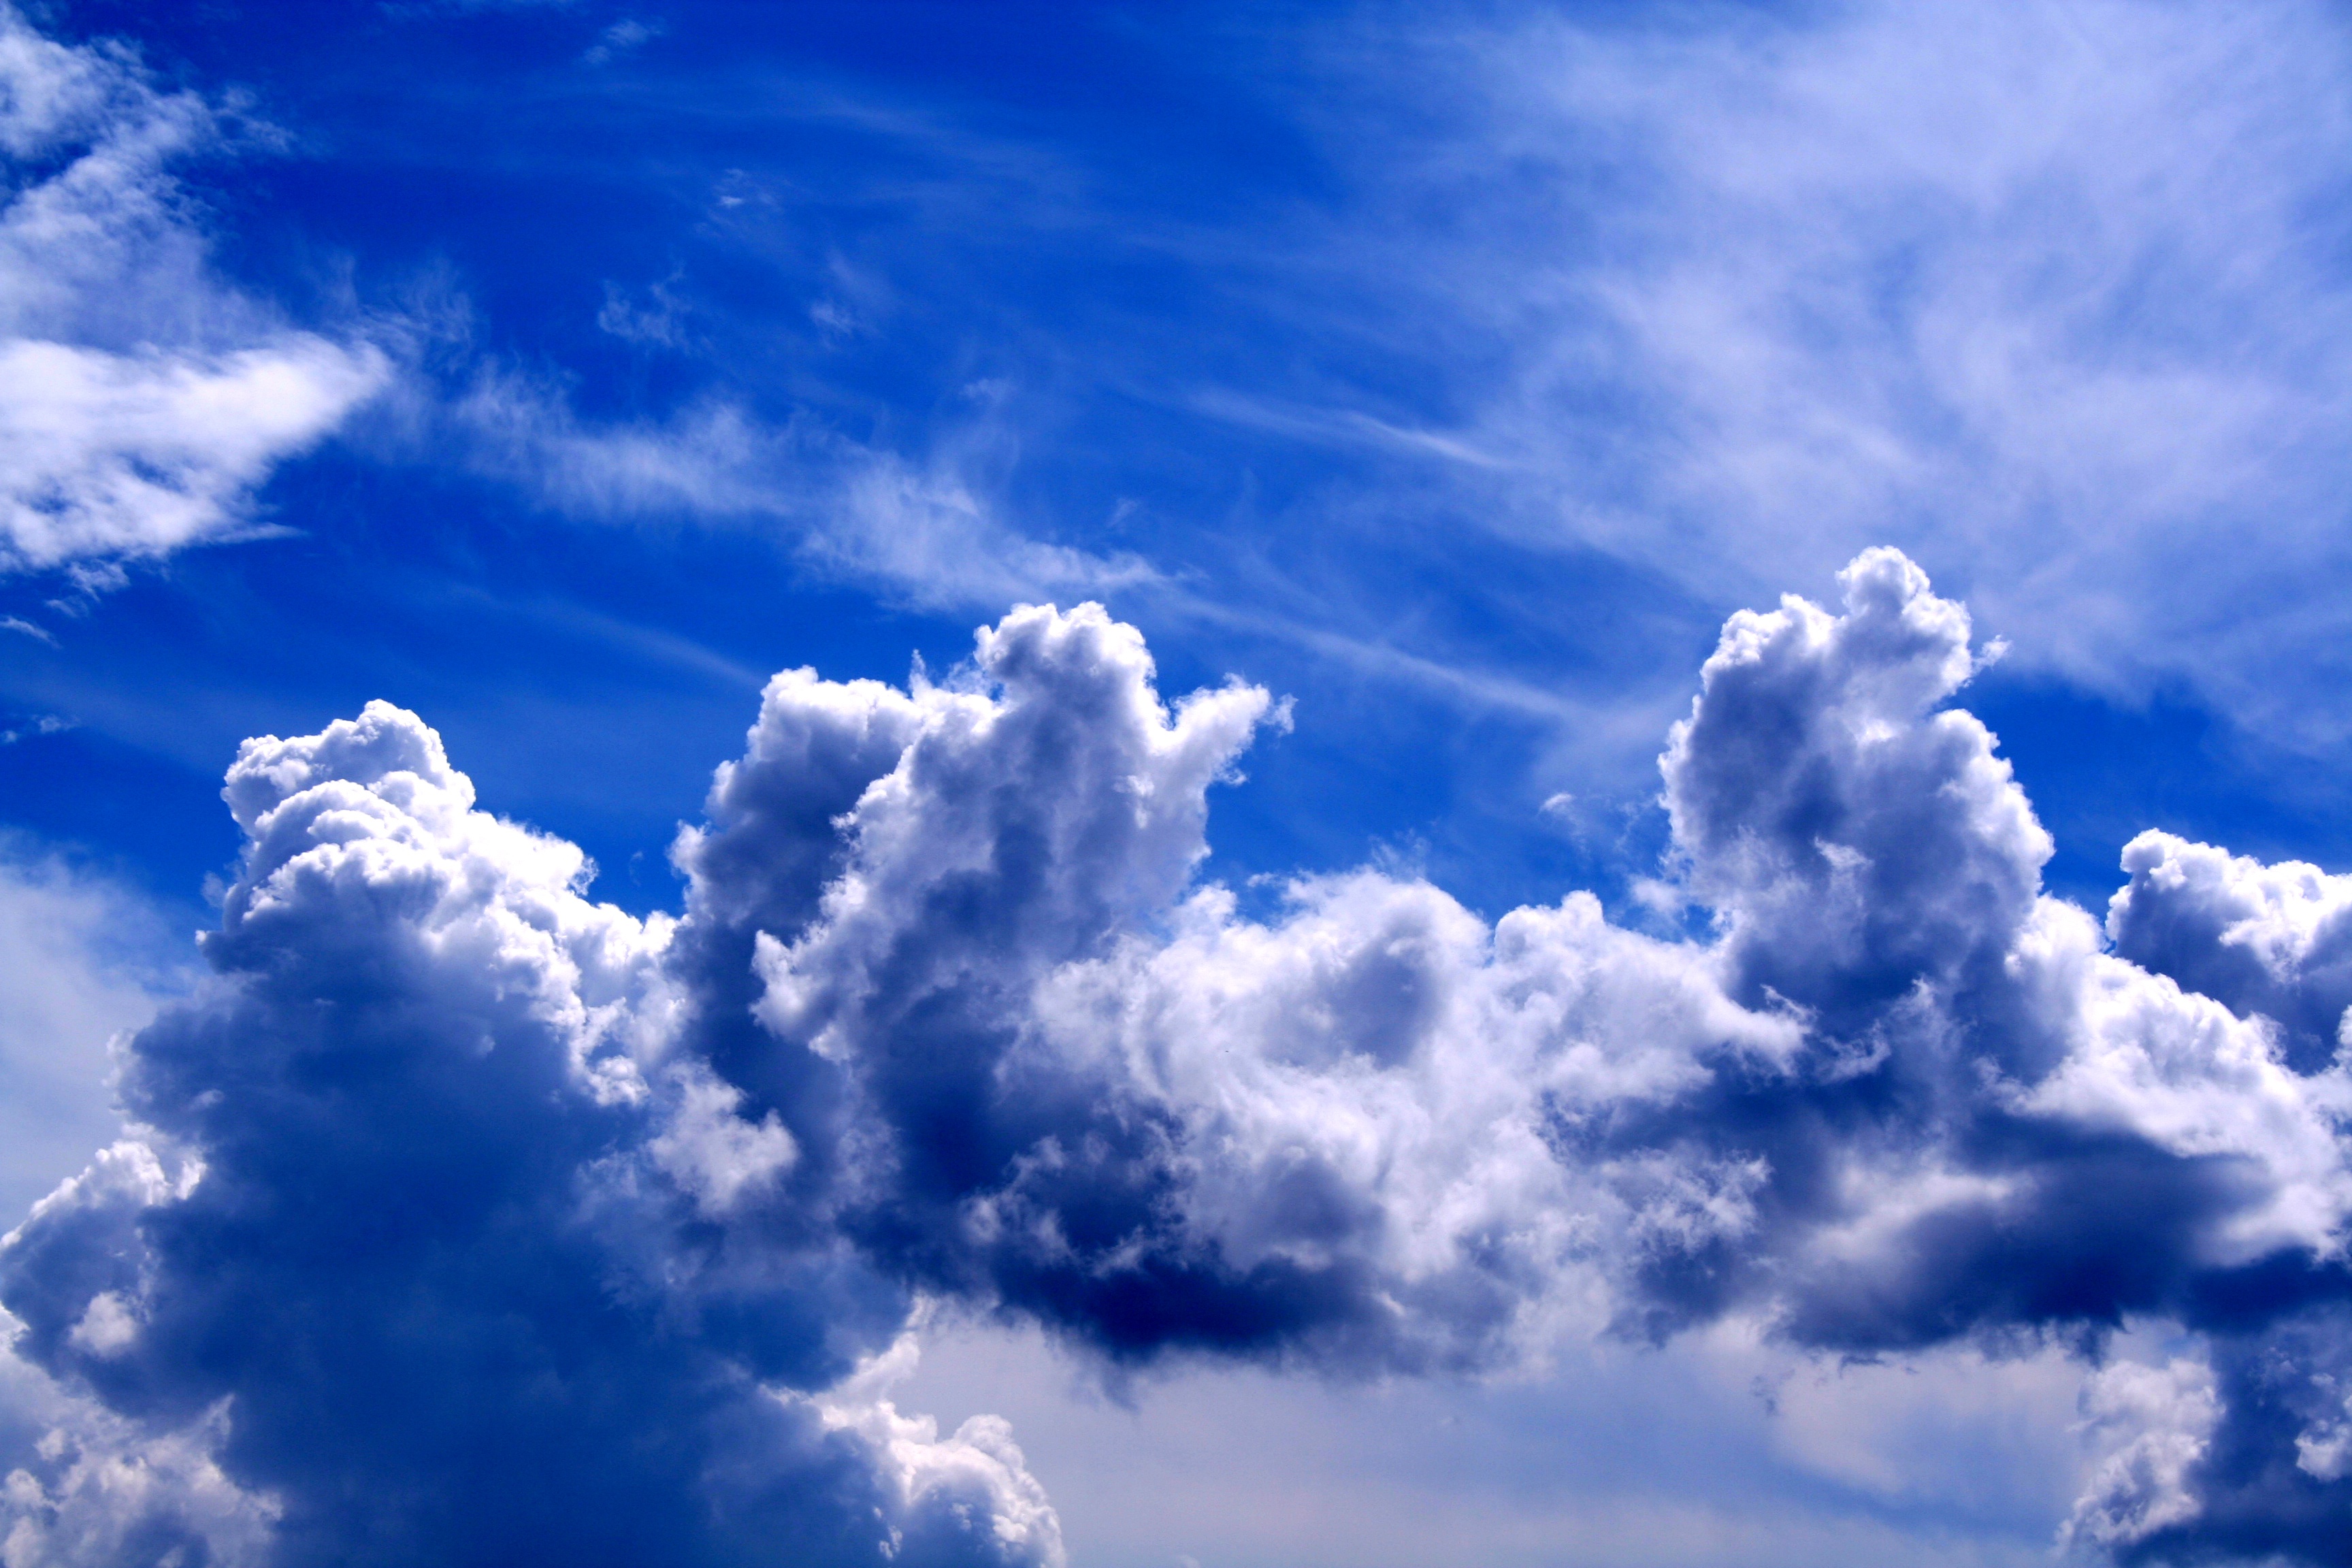 Clouds Desktop Wallpapers for HD Widescreen and Mobile Page 3456x2304